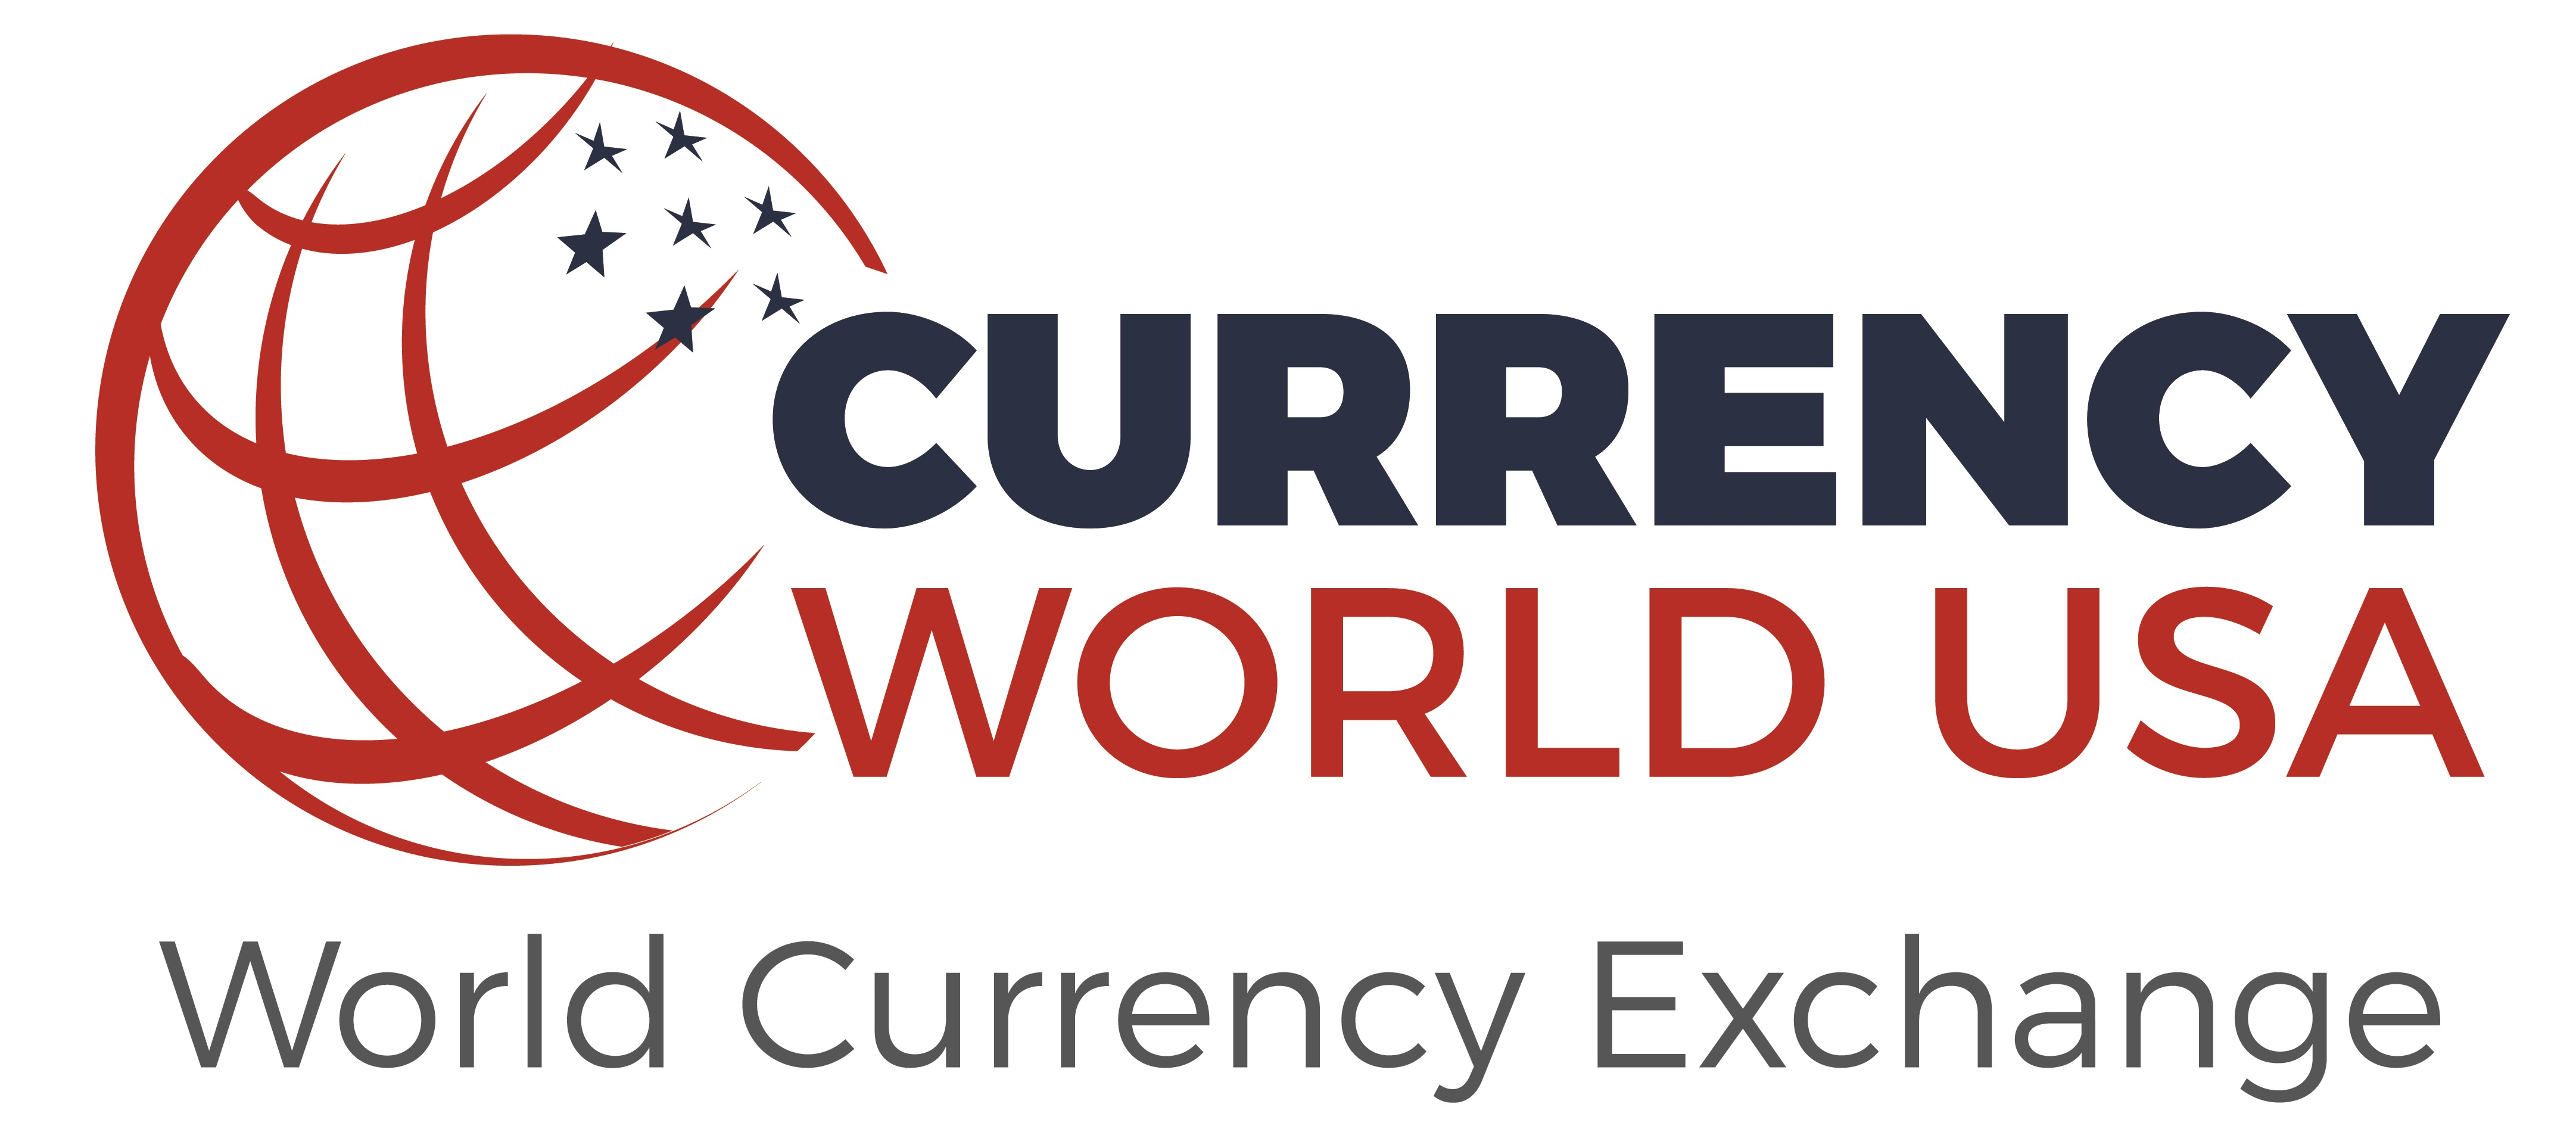 Foreign Currency Exchange